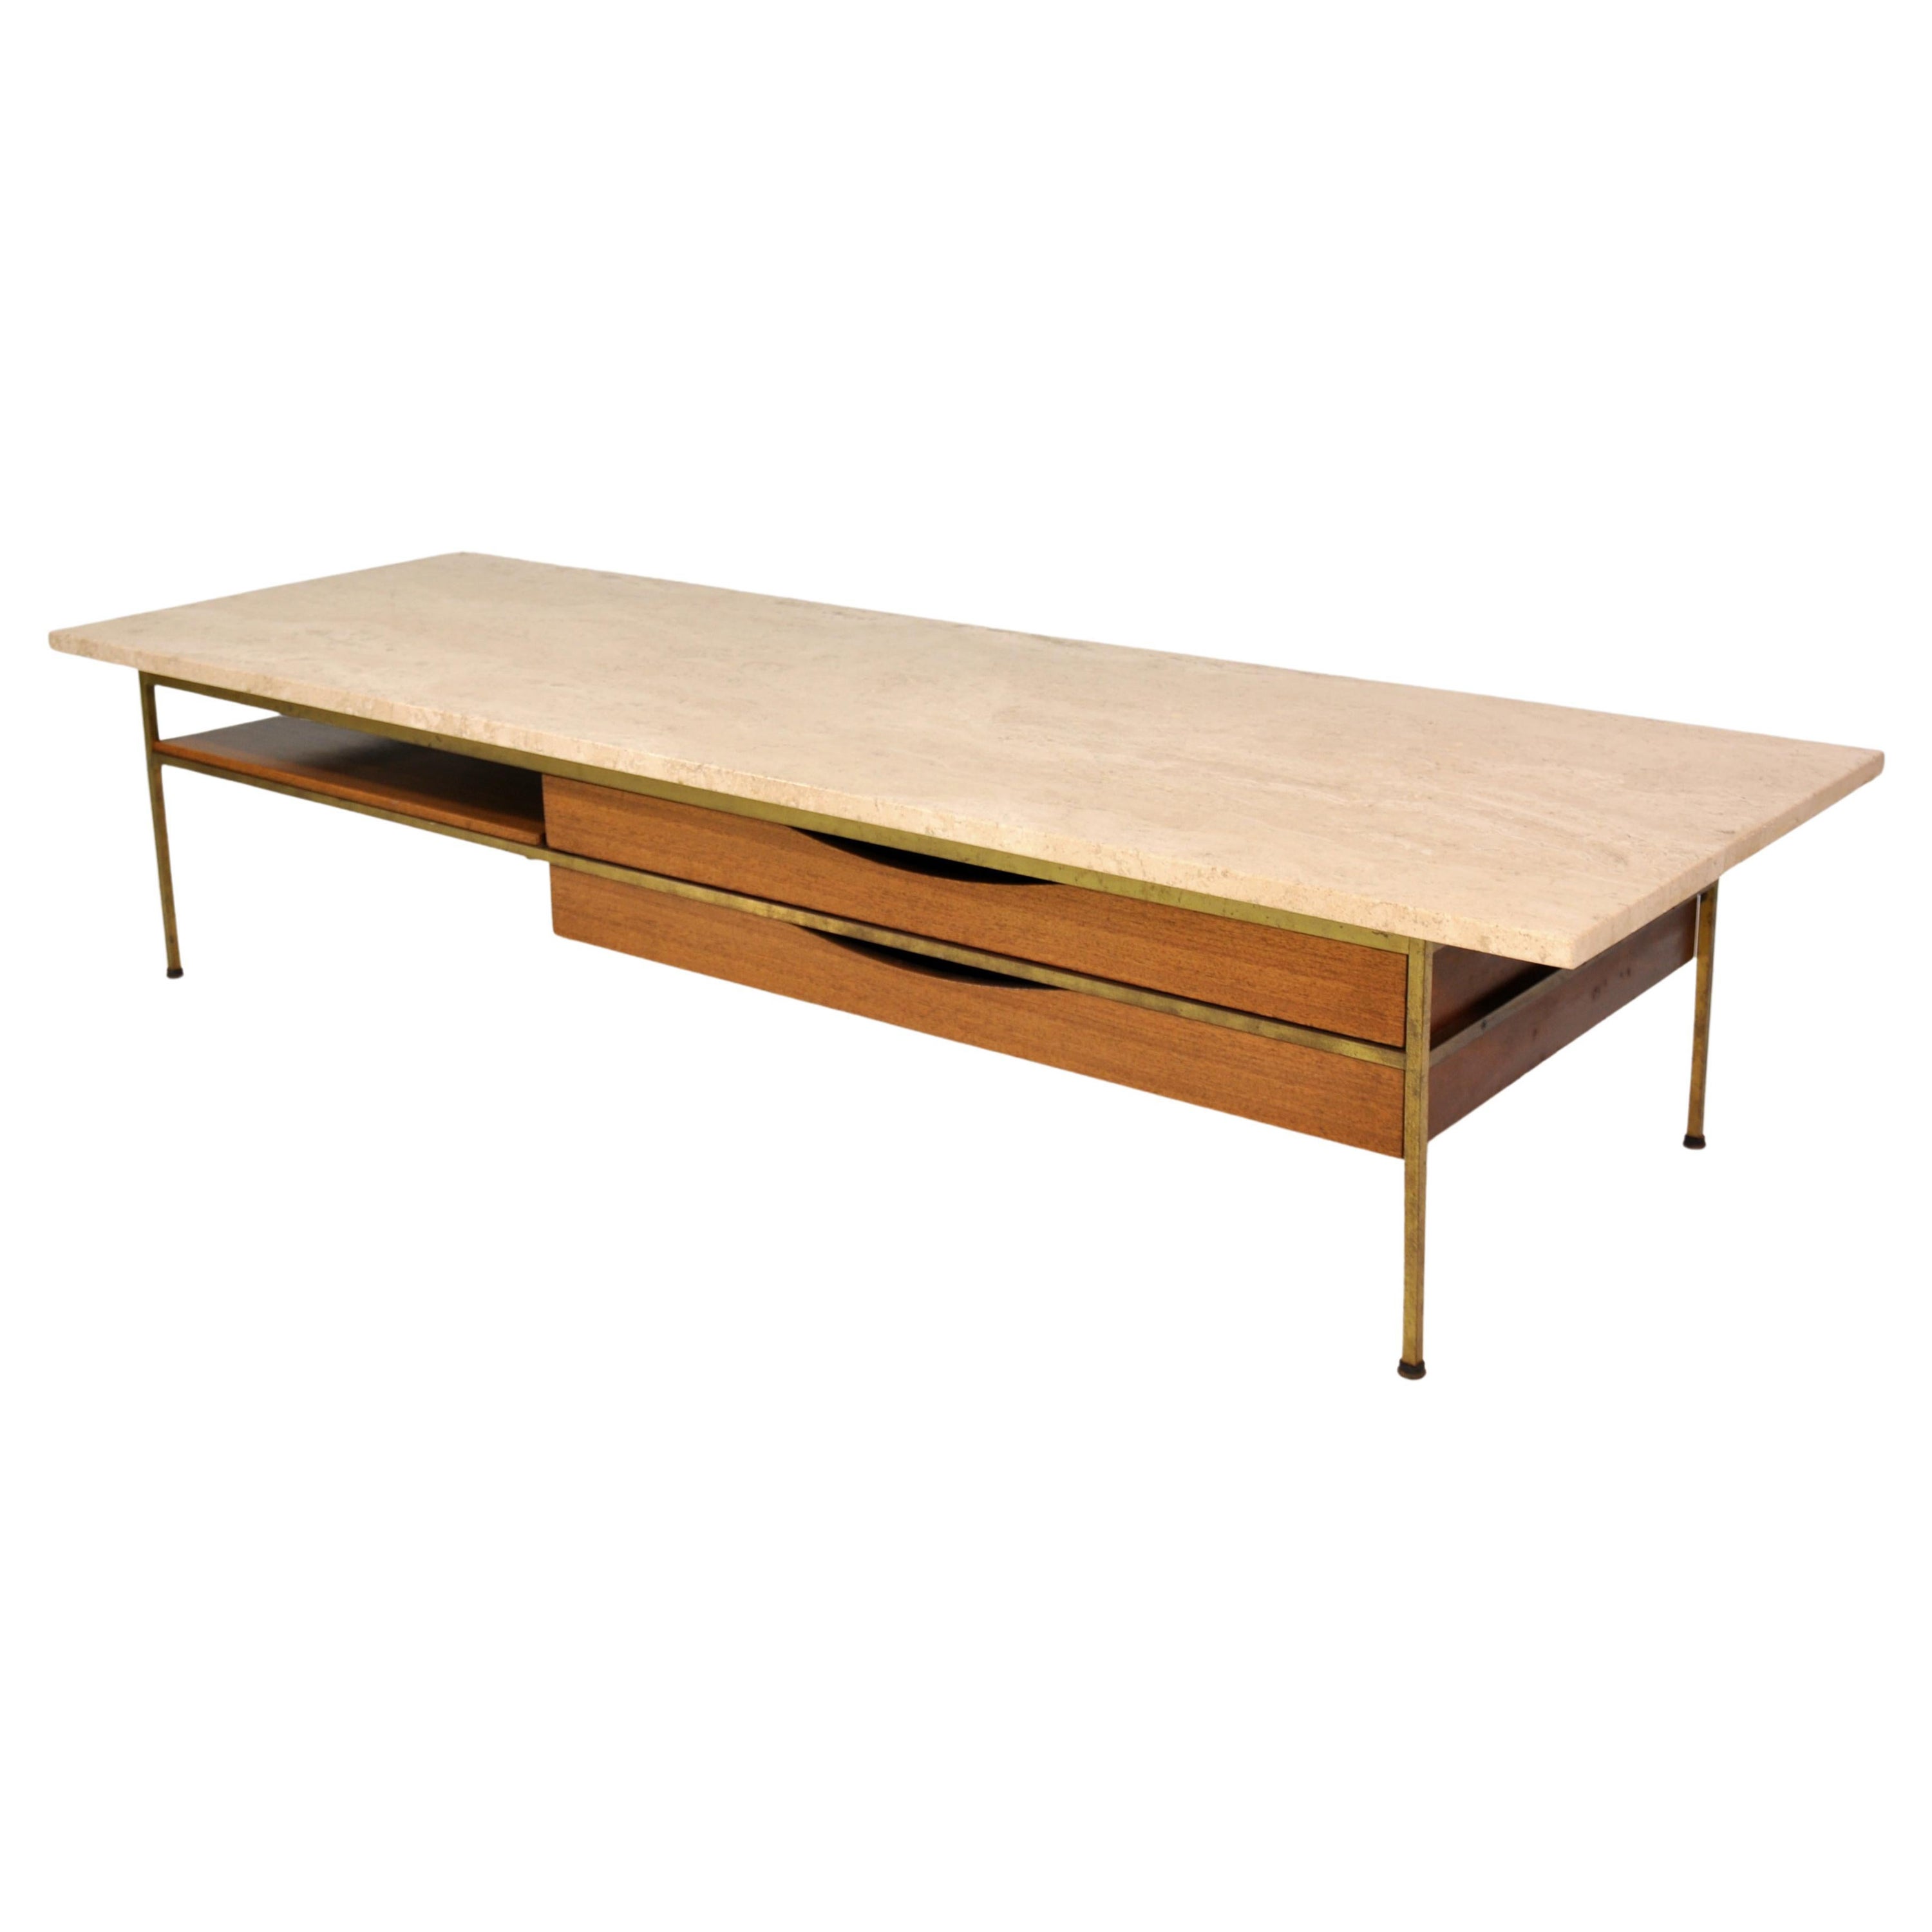 Paul McCobb Irwin Collection Brass and Travertine Coffee Table by Calvin